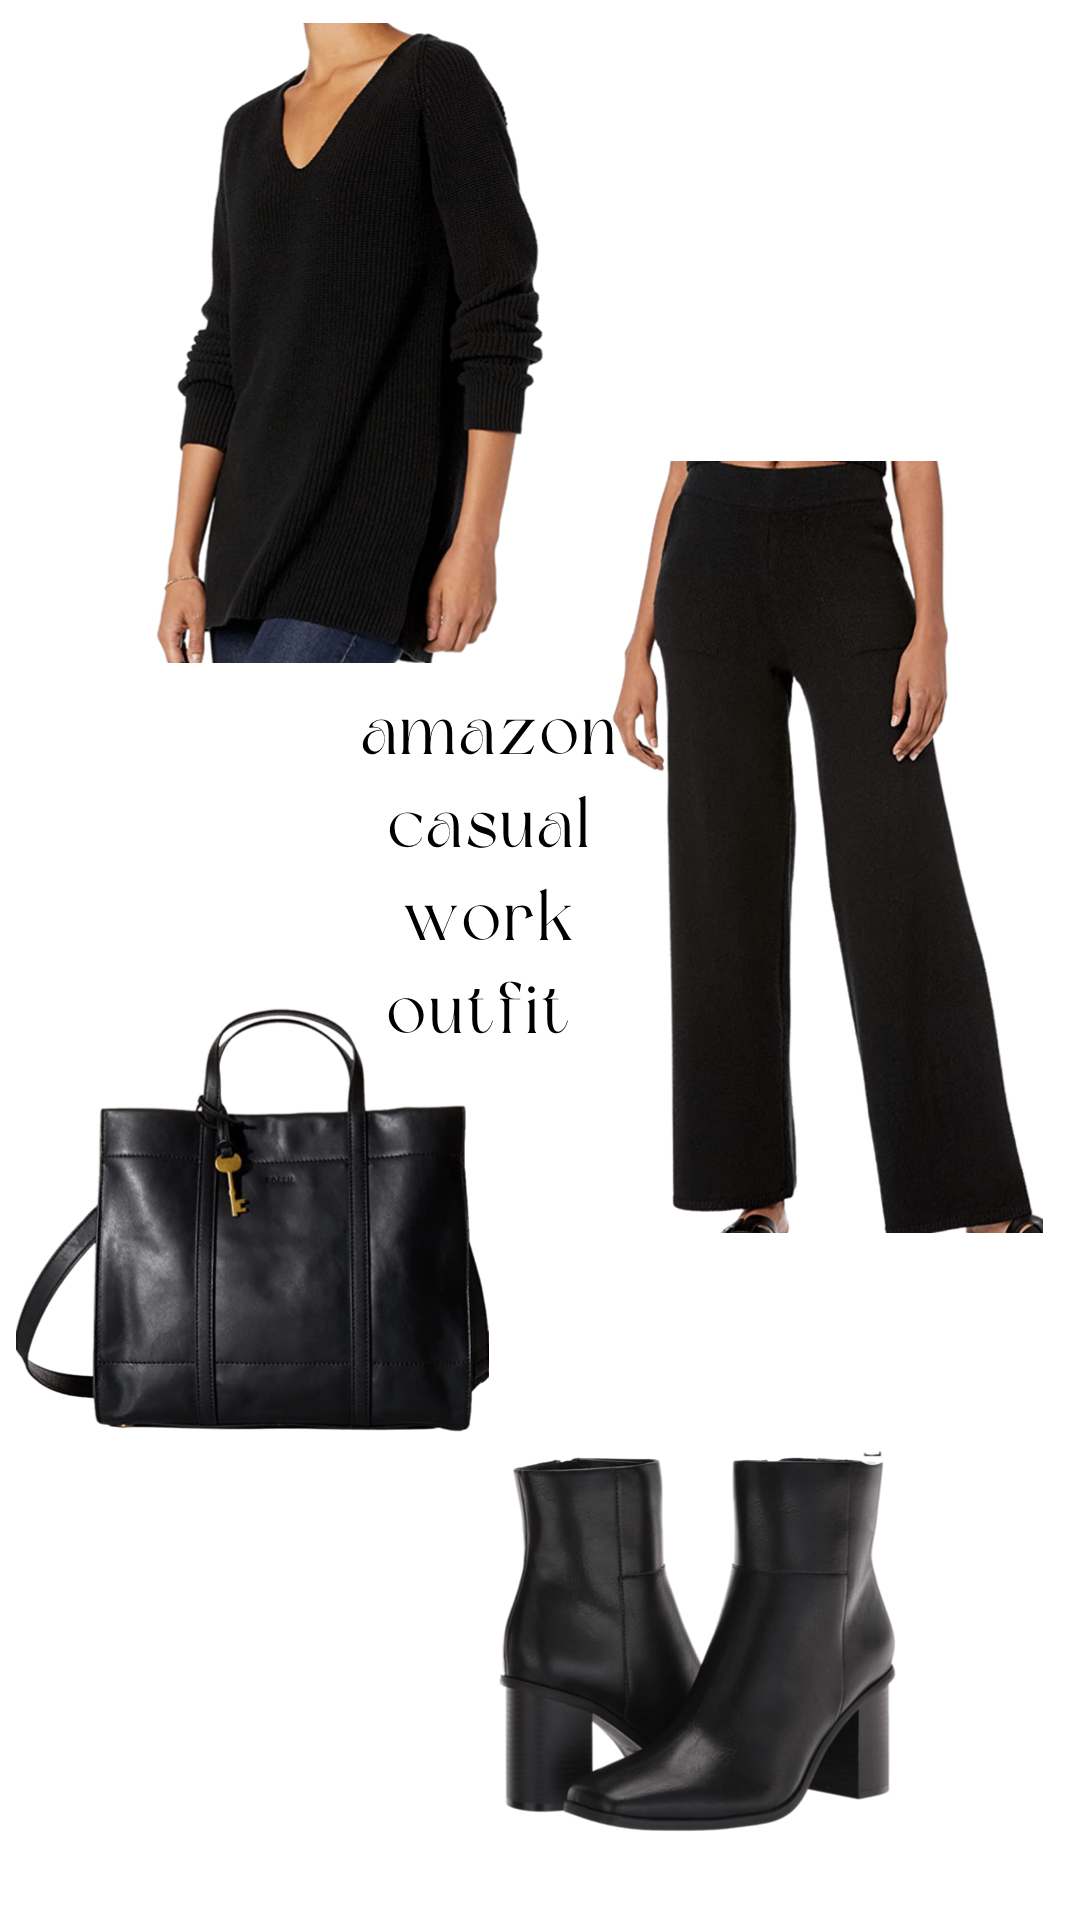 The Best of Amazon Prime Day 2022 | Amazon Home Finds | Amazon Beauty Finds | How To Shop Amazon Prime Day | What To Buy Amazon Prime Day | Best Amazon Prime Day Deals | Amazon Shopping Guide | Amazon Fall Capsule Wardrobe | What To Wear This Fall 2022 | Amazon Fashion Finds | Work Outfit | Simply by Simone